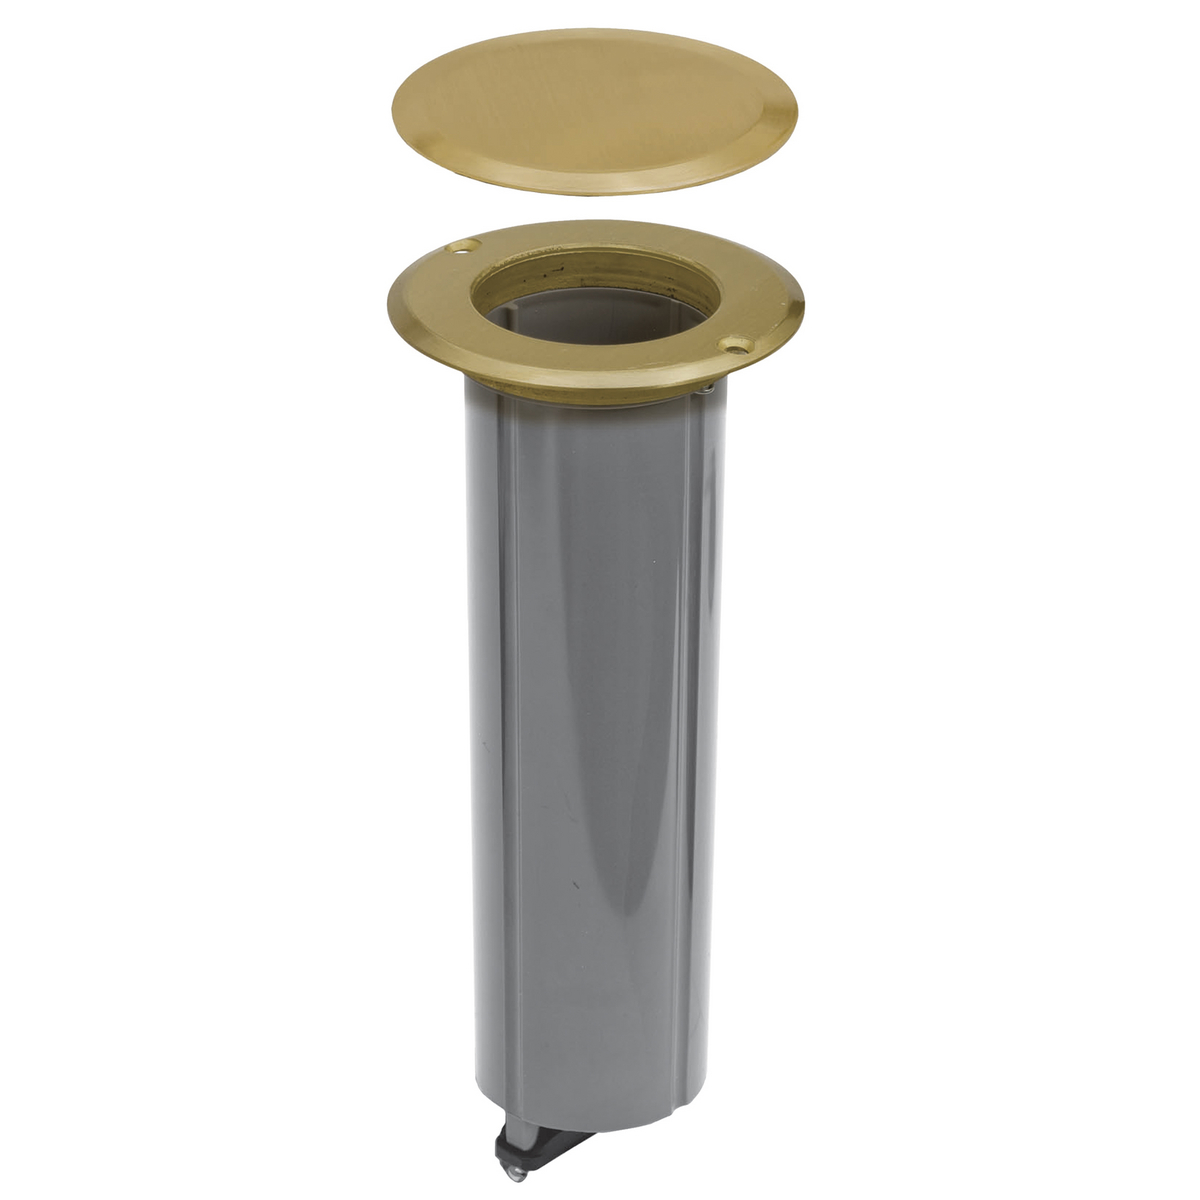 Round, Drop-In Brass Floor box - Nonmetallic with Brass Flange andCover, for Power or Data